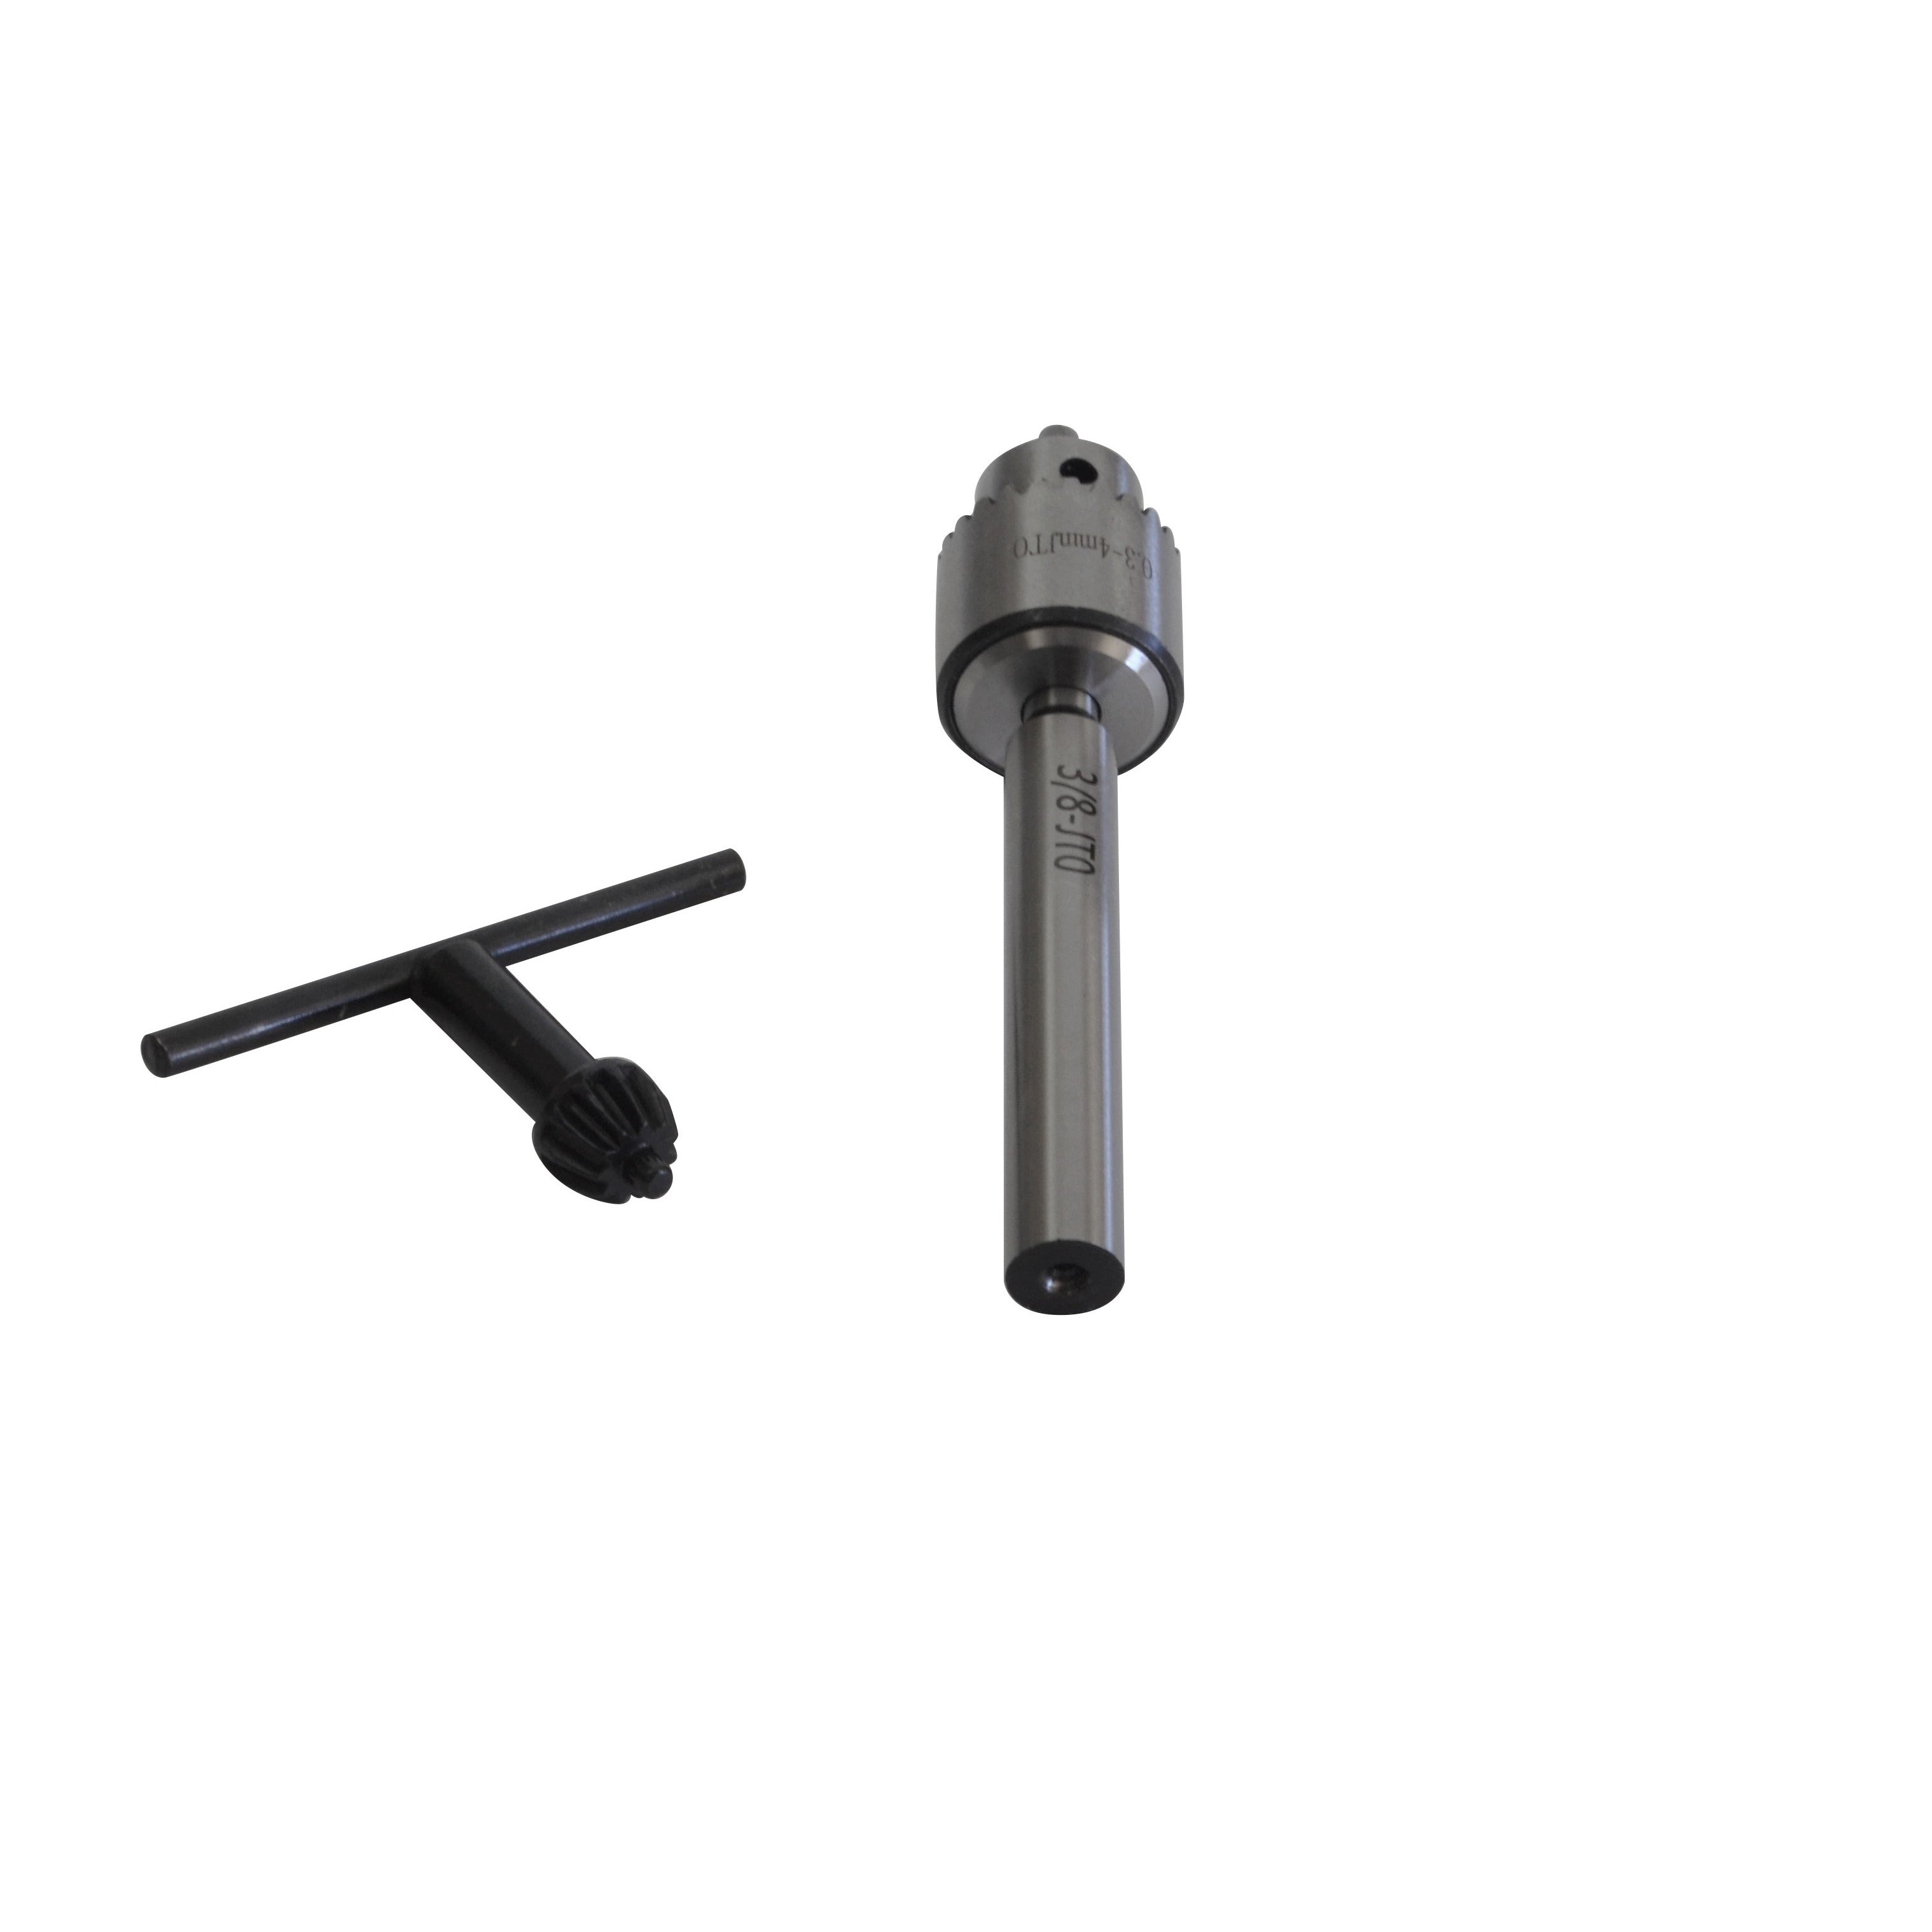 0.3-4mm Key Drill Chuck with JT0 3/8 straight shank arbor supplied, all steel